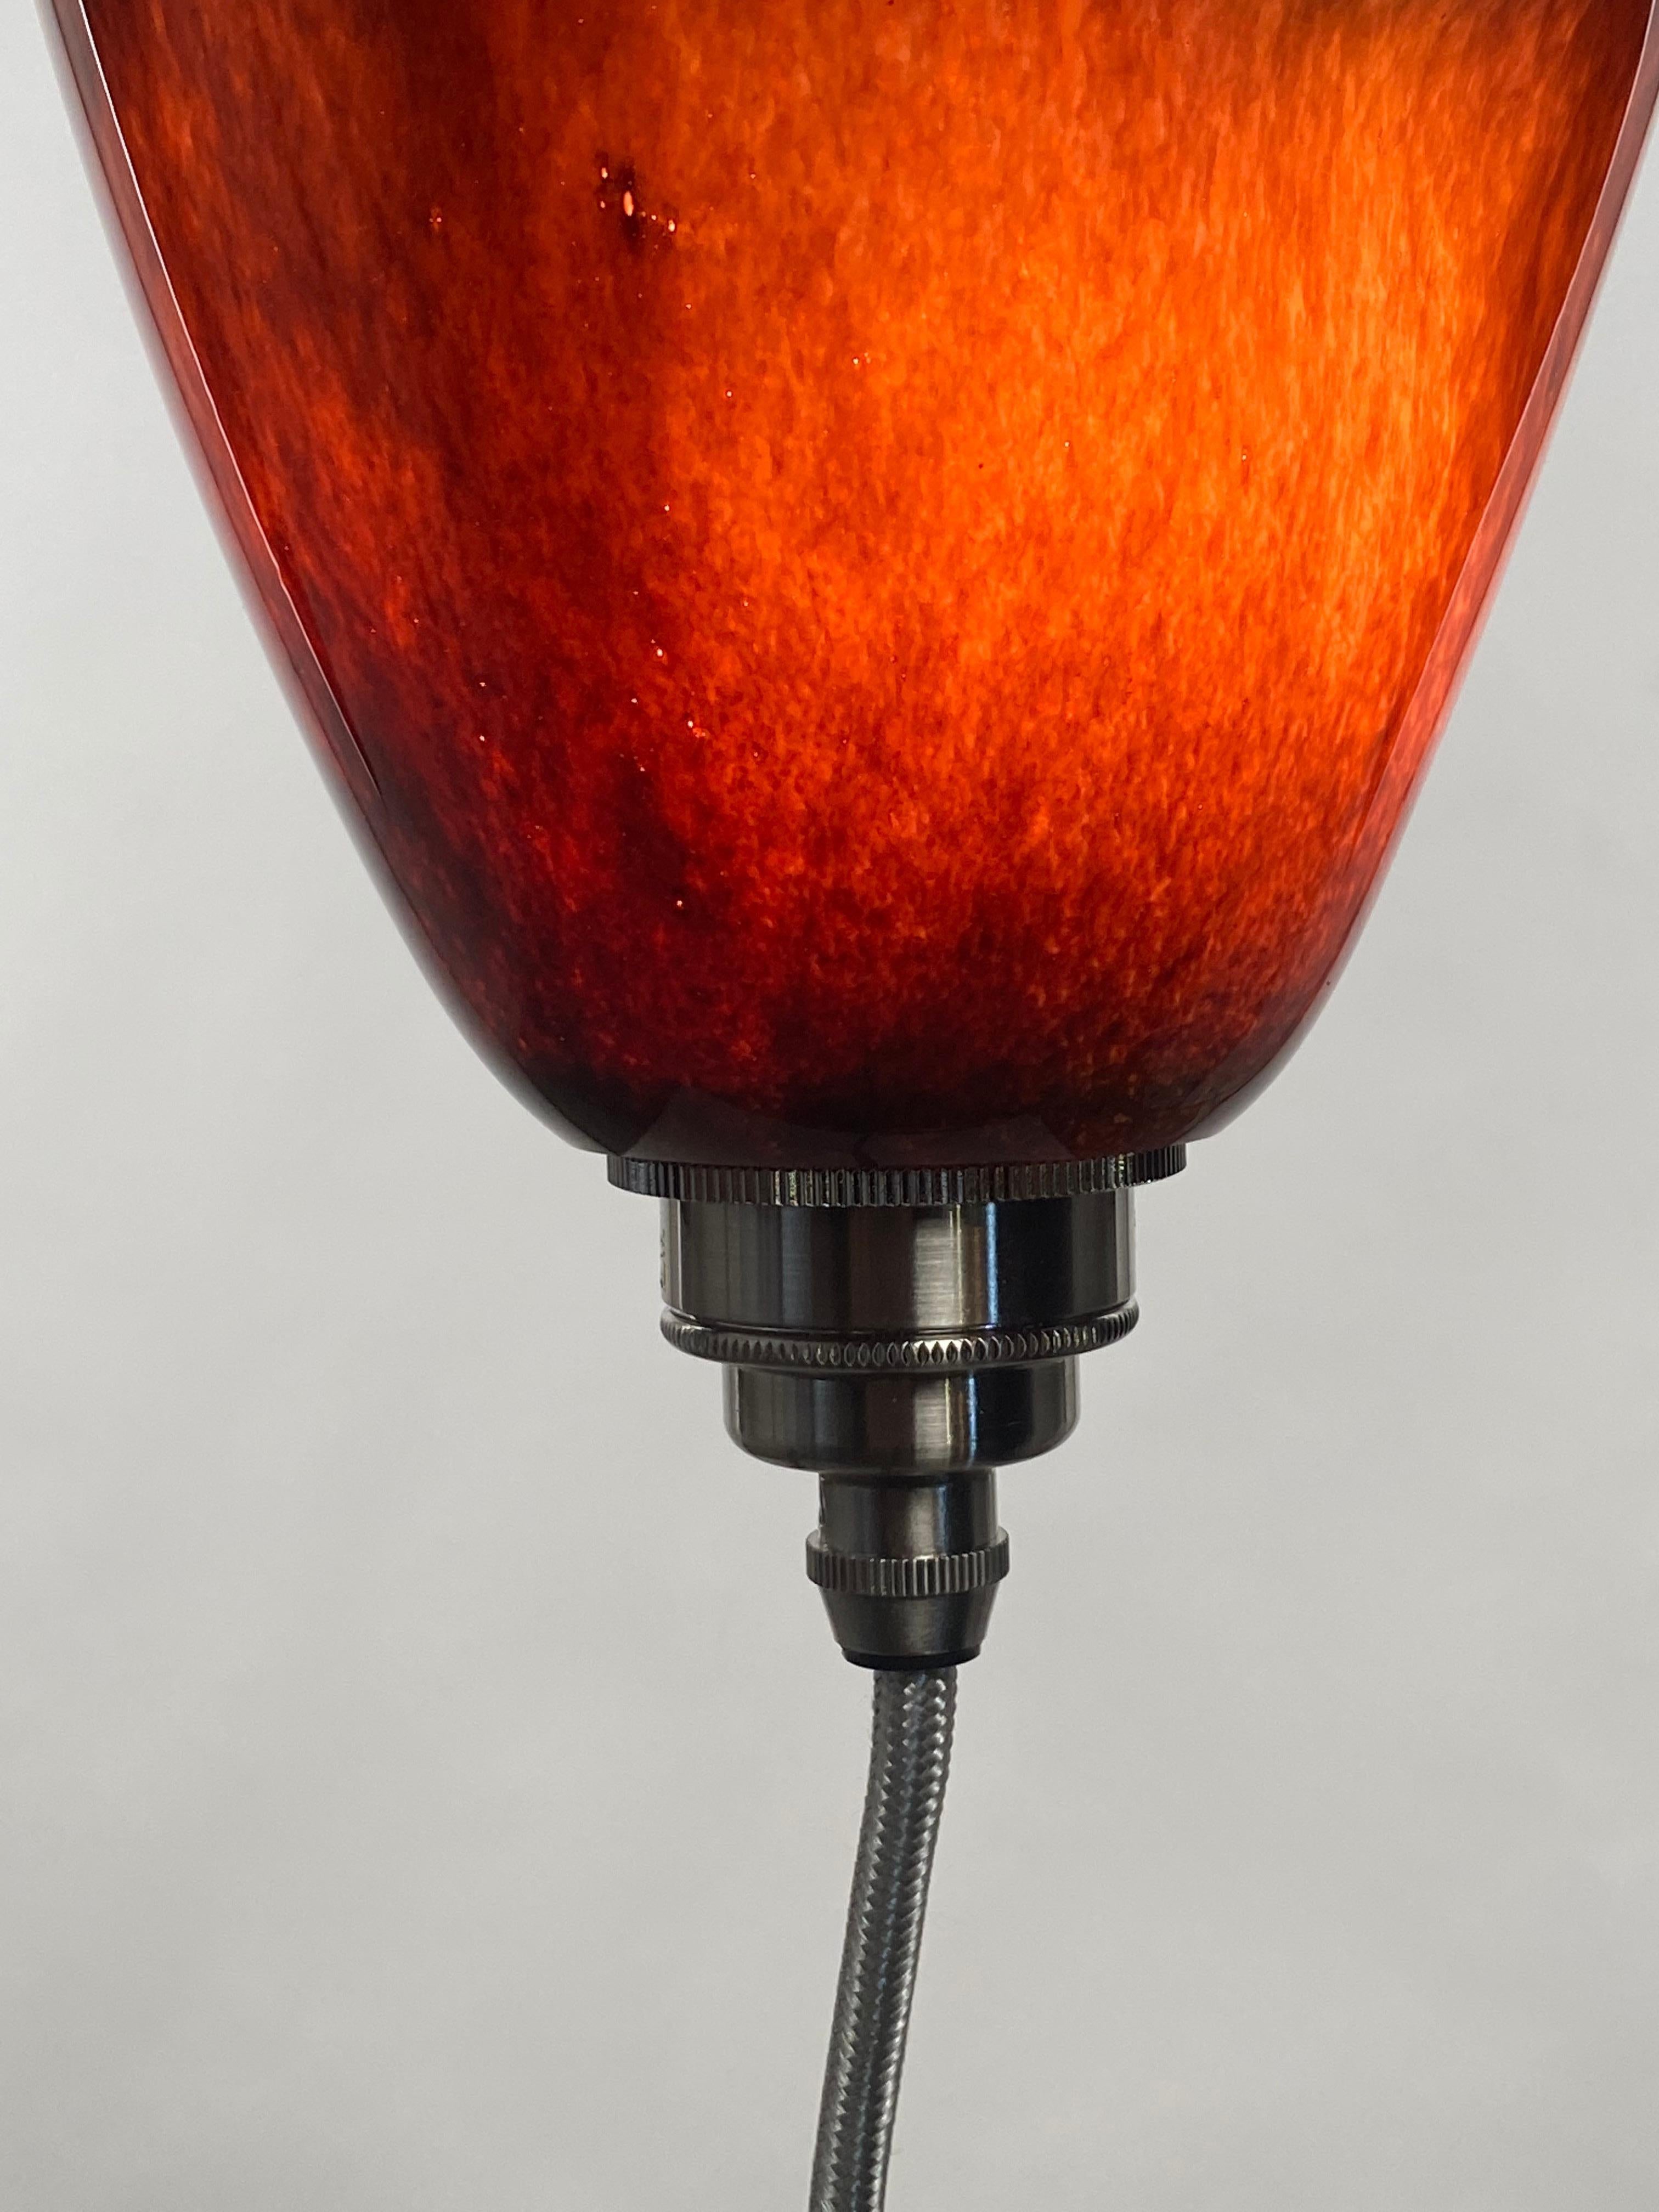 Blown Glass Brown Orange Lamp Pendent Light, 21st Century by Mattia Biagi In New Condition For Sale In Culver City, CA